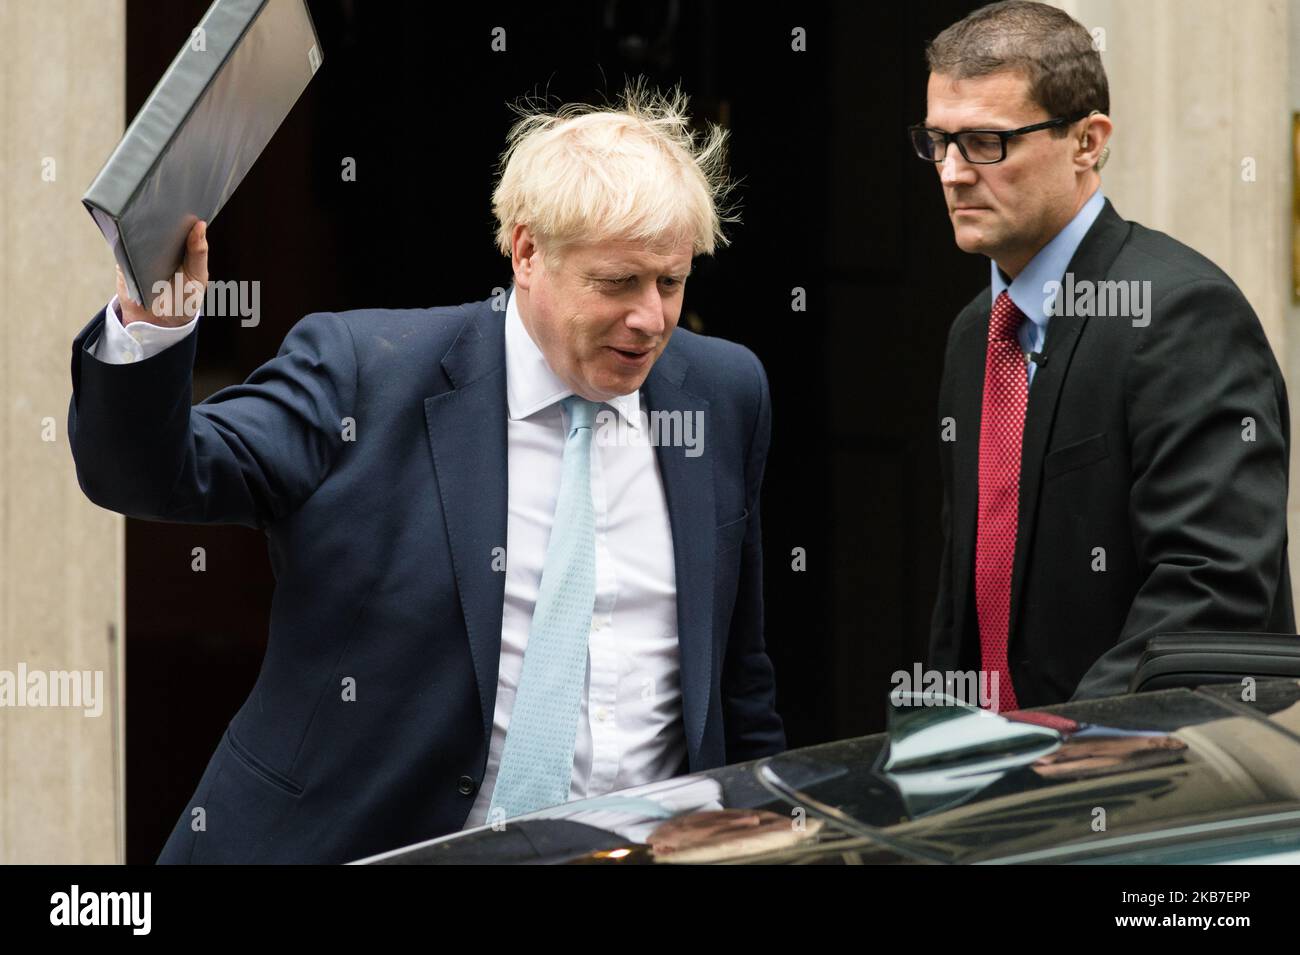 British Prime Minister Boris Johnson leaves 10 Downing Street for the House of Commons on 03 October, 2019 in London, England. Boris Johnson will set out his proposals for a Brexit deal to the MPs, including details on a replacement for the Irish border ''backstop'' in the current Brexit agreement as outlined in his letter to the European Commission president Jean-Claude Junker yesterday. (Photo by WIktor Szymanowicz/NurPhoto) Stock Photo